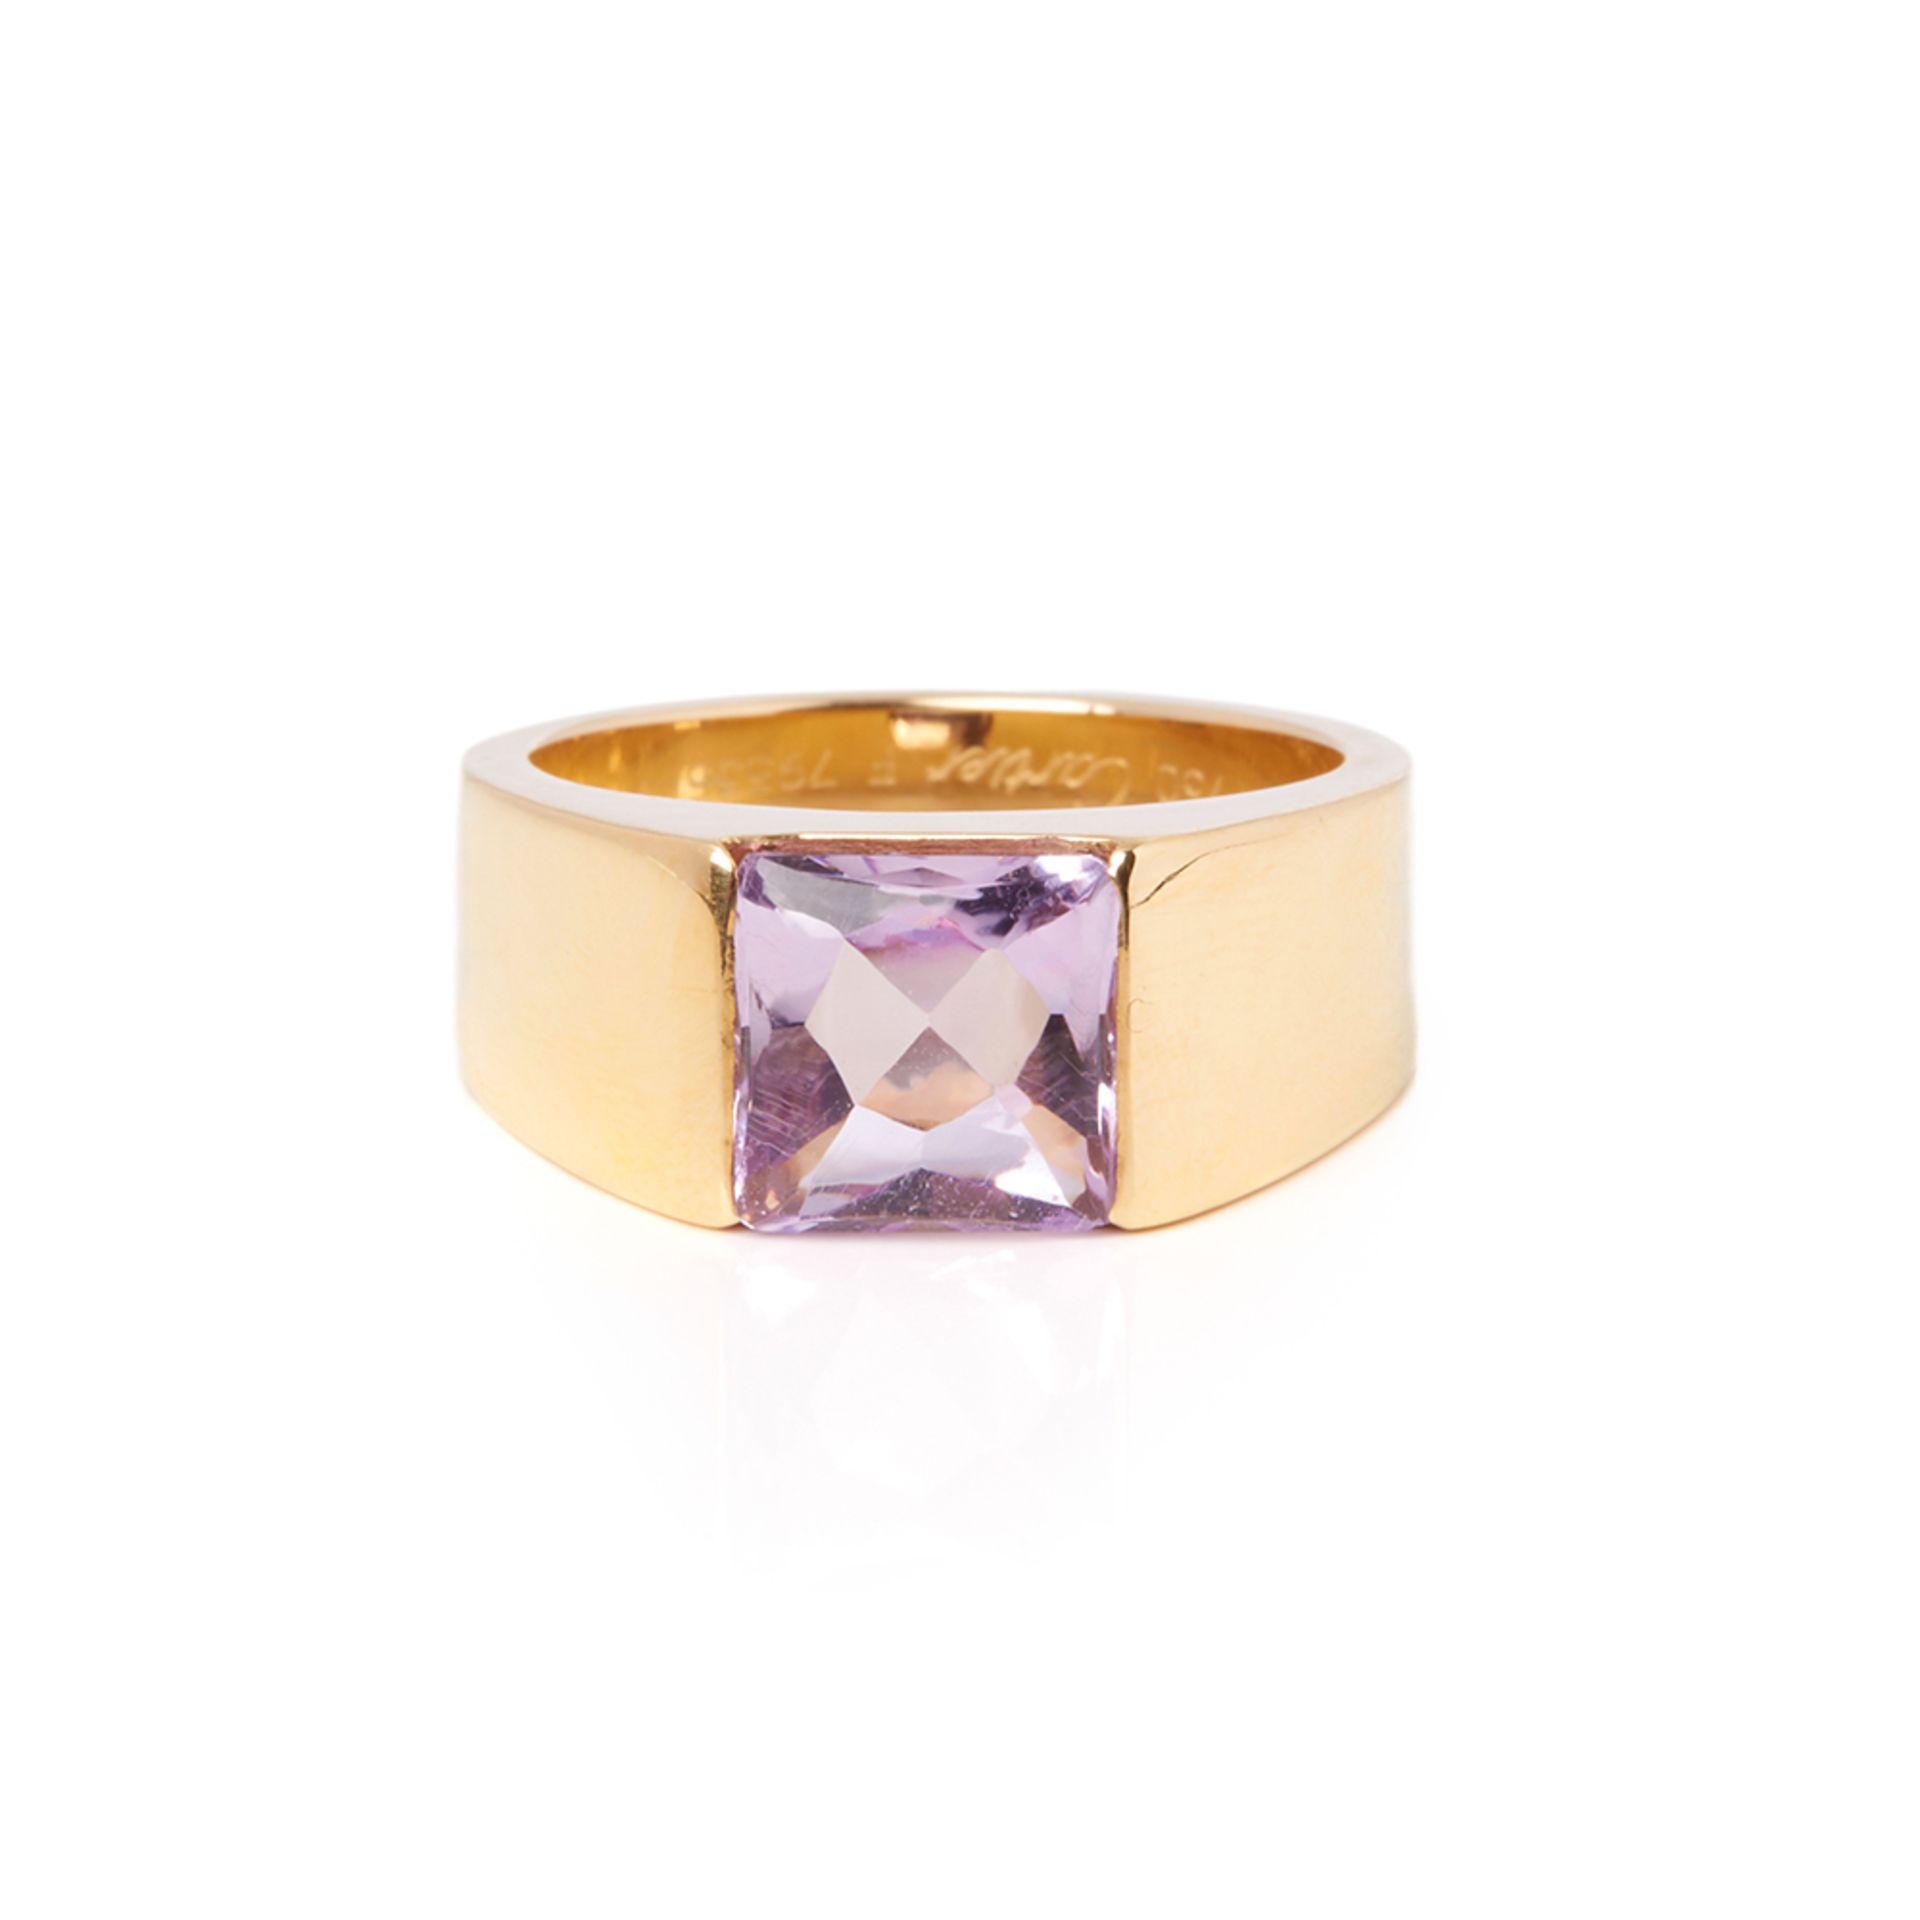 Cartier 18k Yellow Gold Amethyst Tank Ring - Image 2 of 6